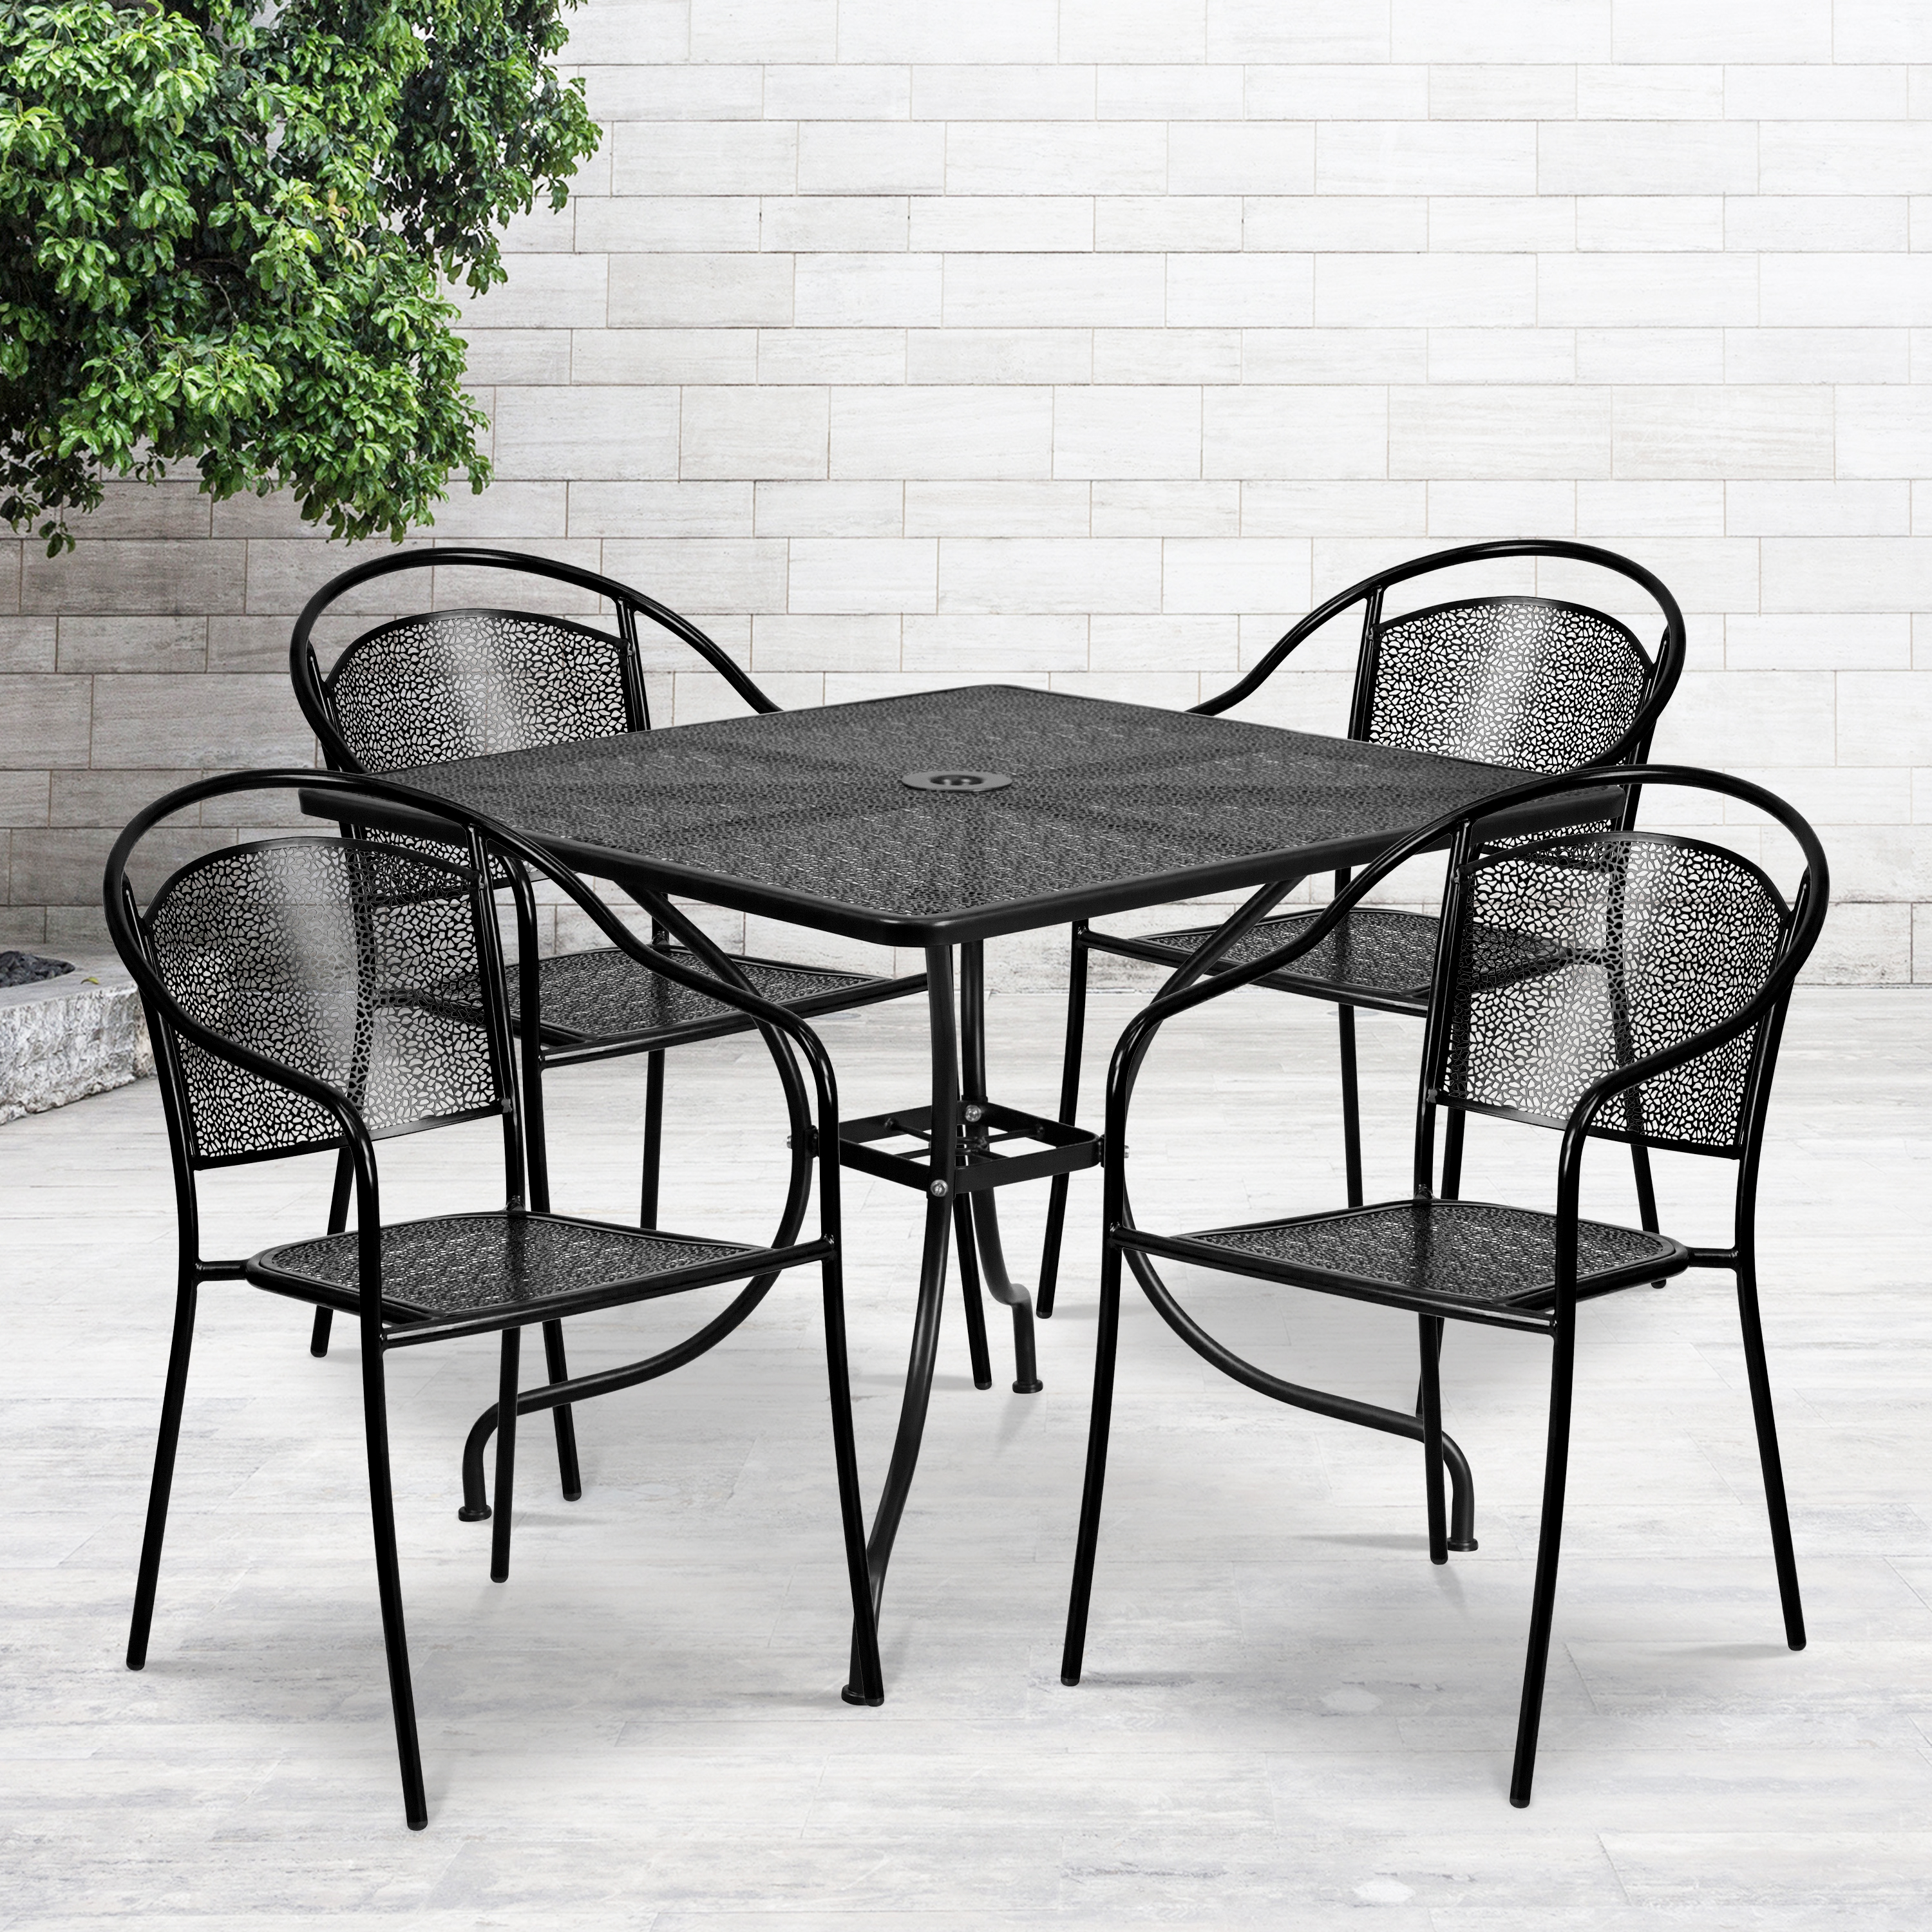 Flash Furniture Commercial Grade 35.5" Square Black Indoor-Outdoor Steel Patio Table Set with 4 Round Back Chairs - image 1 of 12